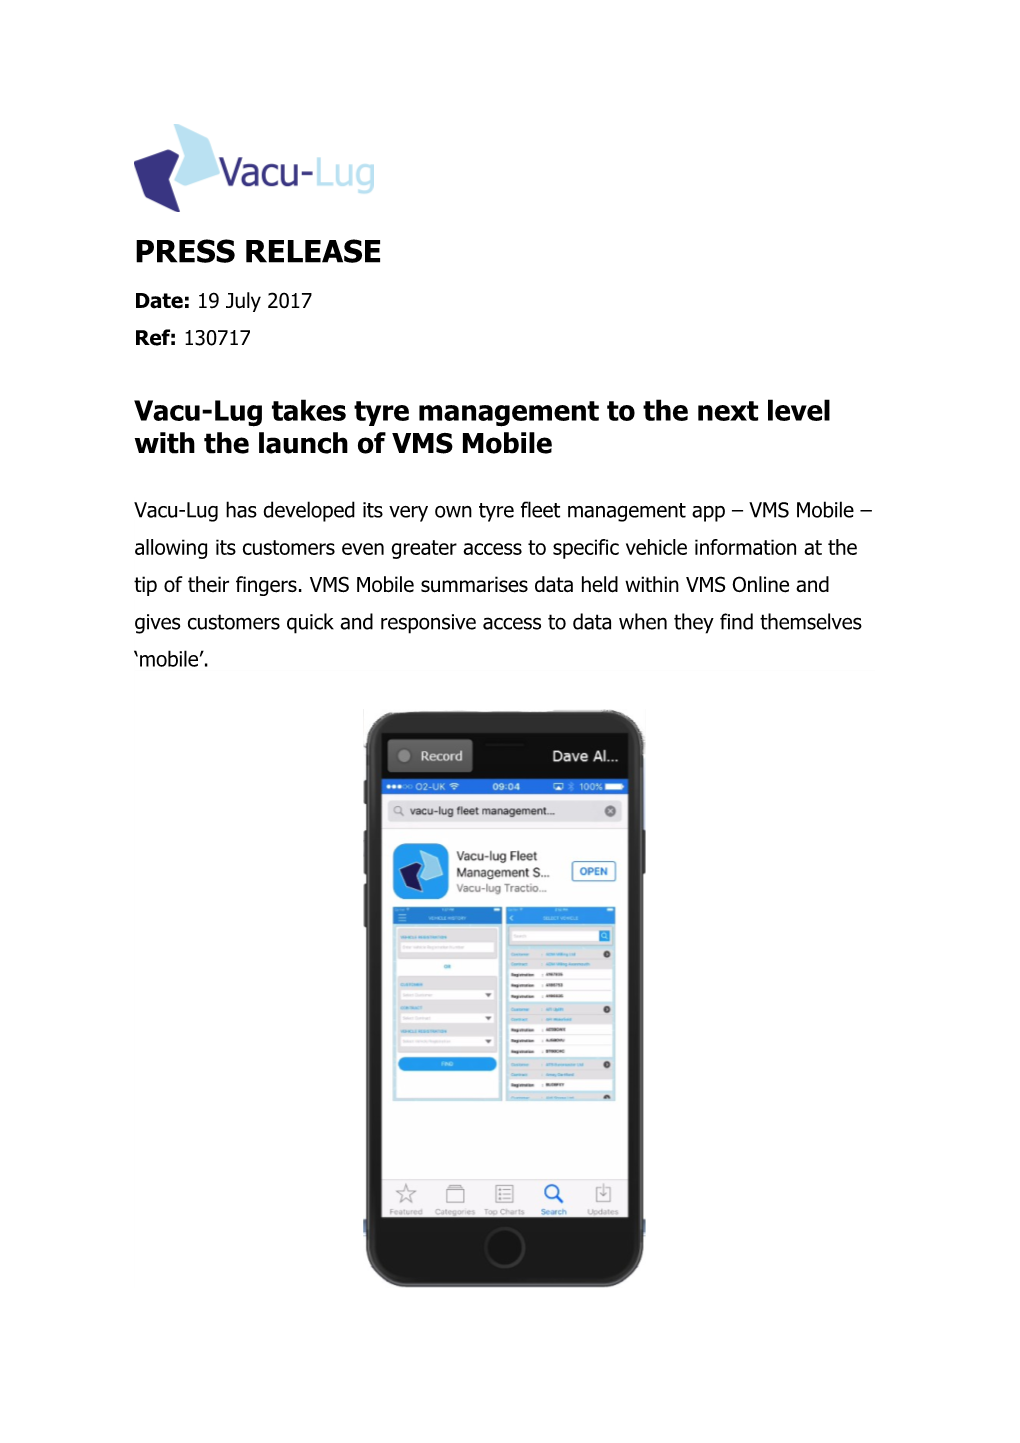 Vacu-Lug Takes Tyre Management to the Next Level with the Launch of VMS Mobile